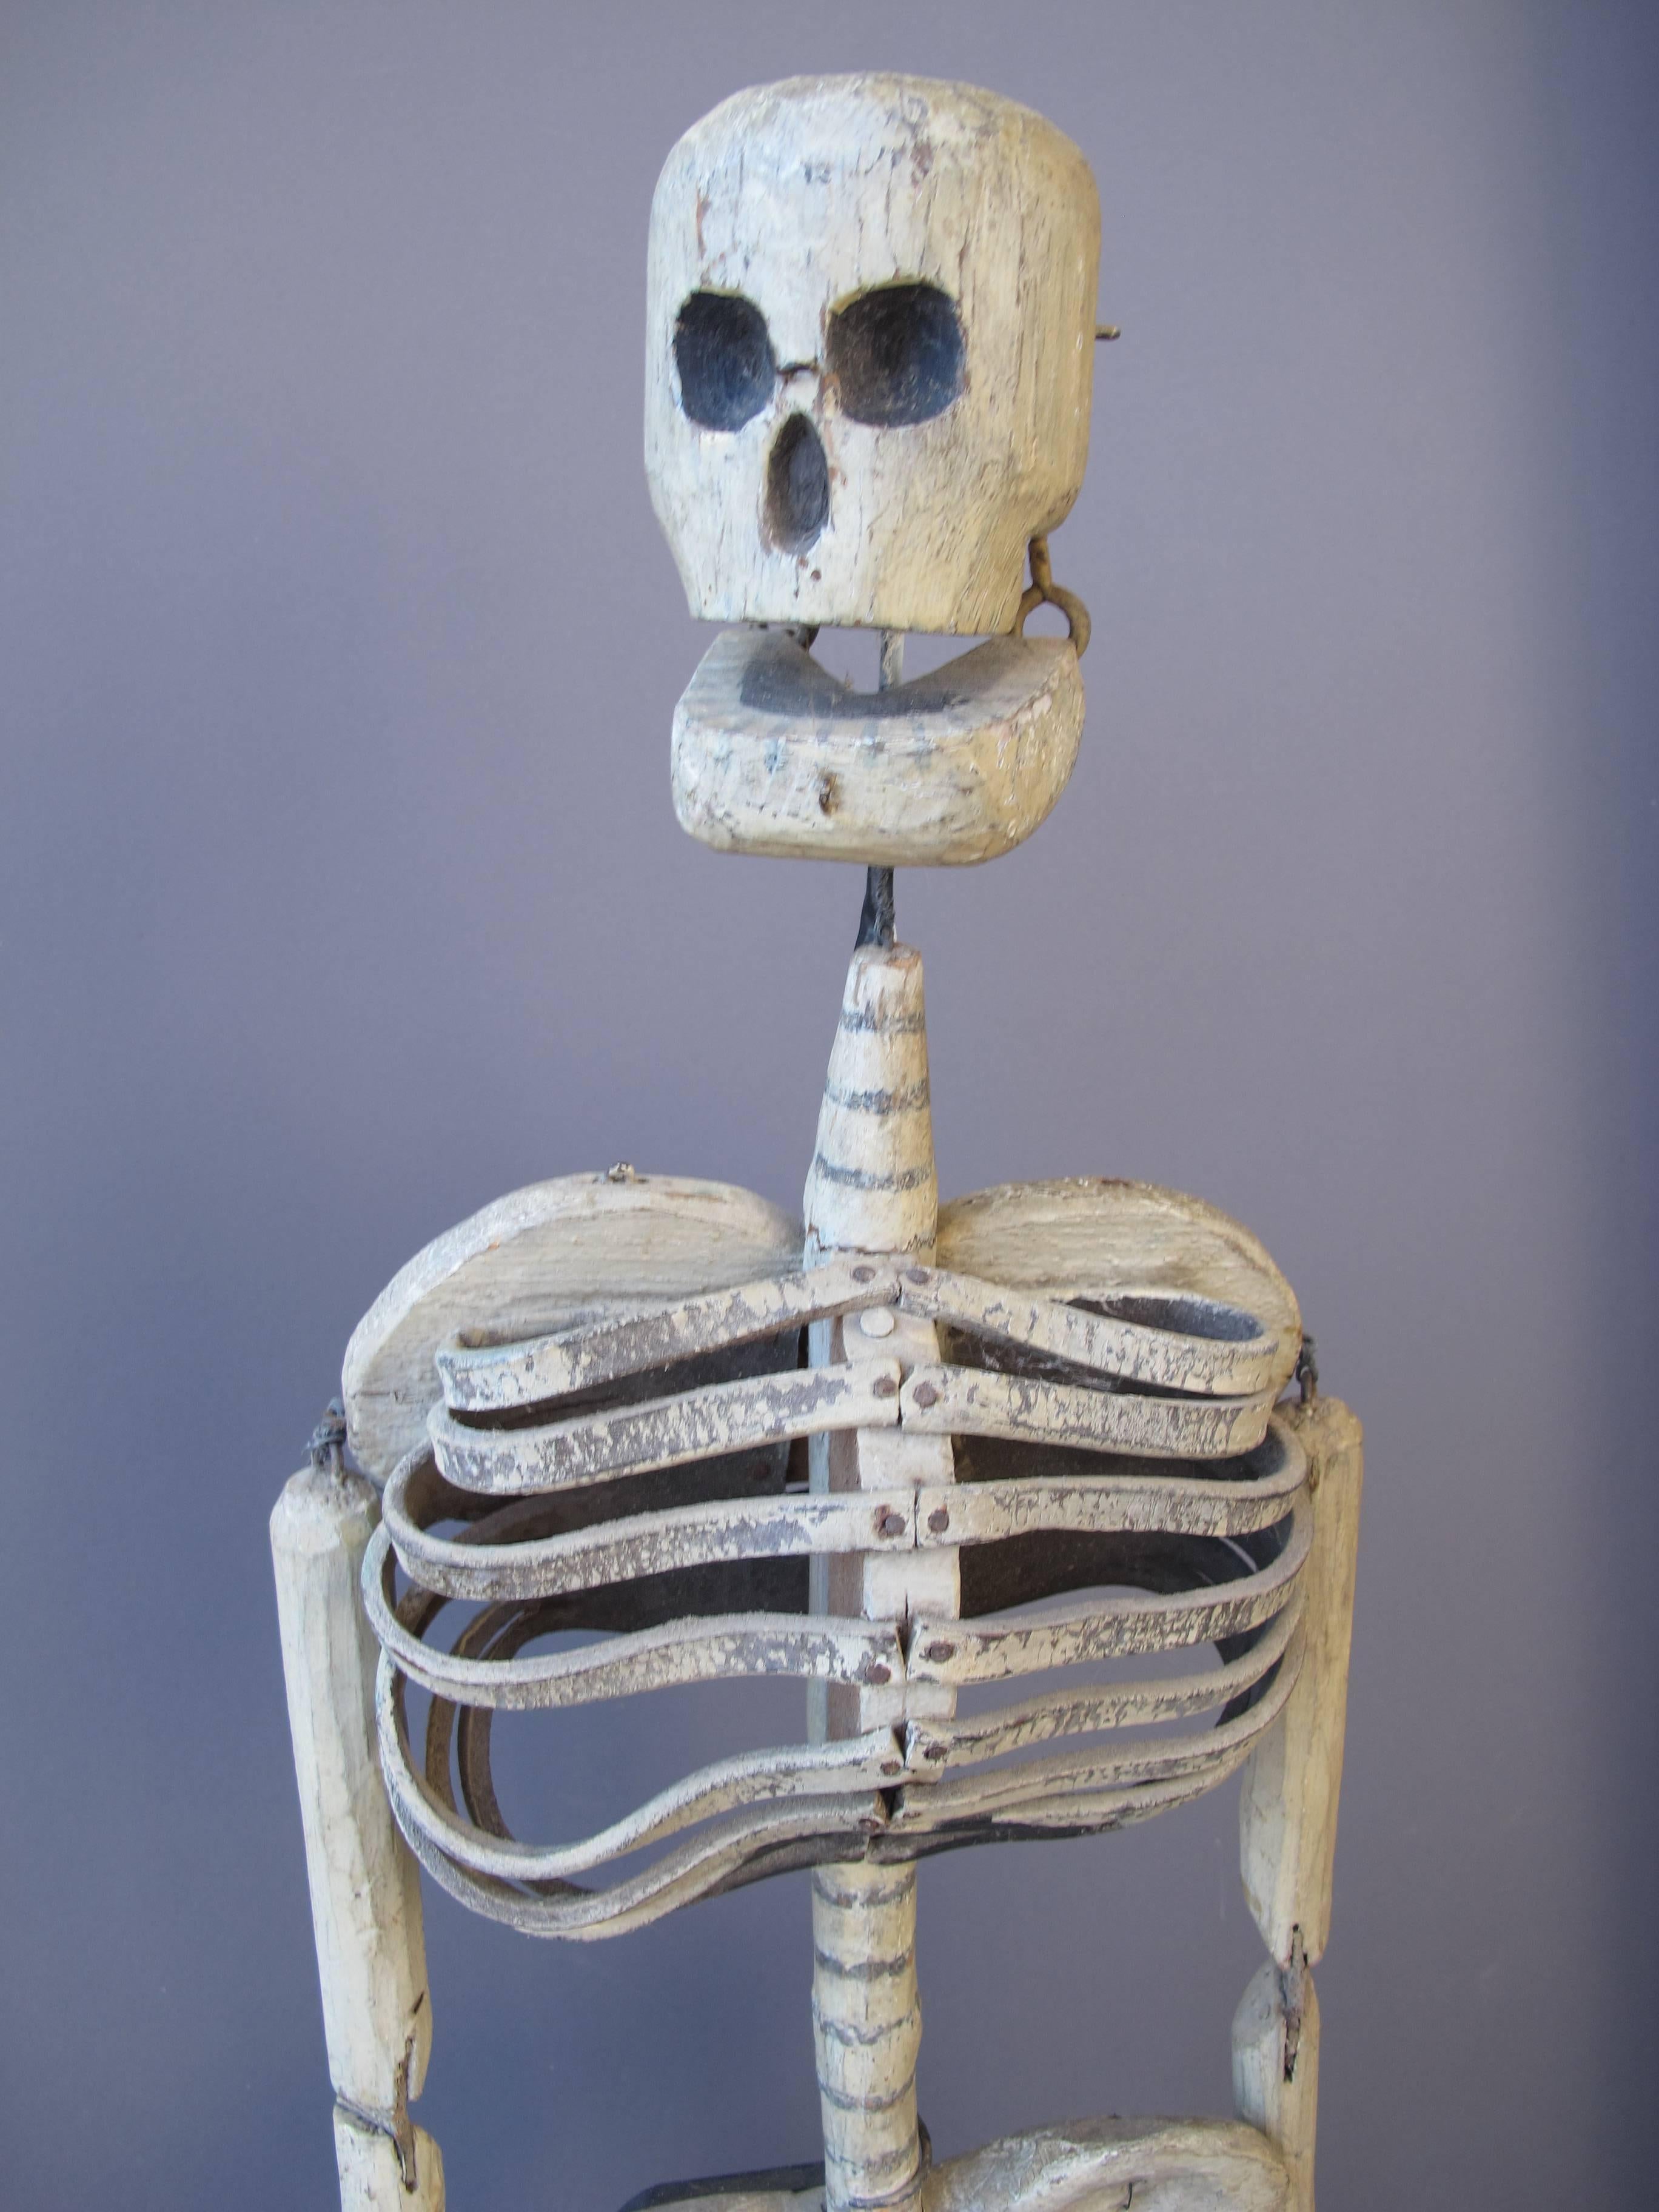 Carved and joined wooden puppet with curved leather for rib cage. This skeleton would be able to be animated or dance with attachment to various points. I was reported to have been used in an Odd Fellows Fraternal Lodge where skeletons were used as